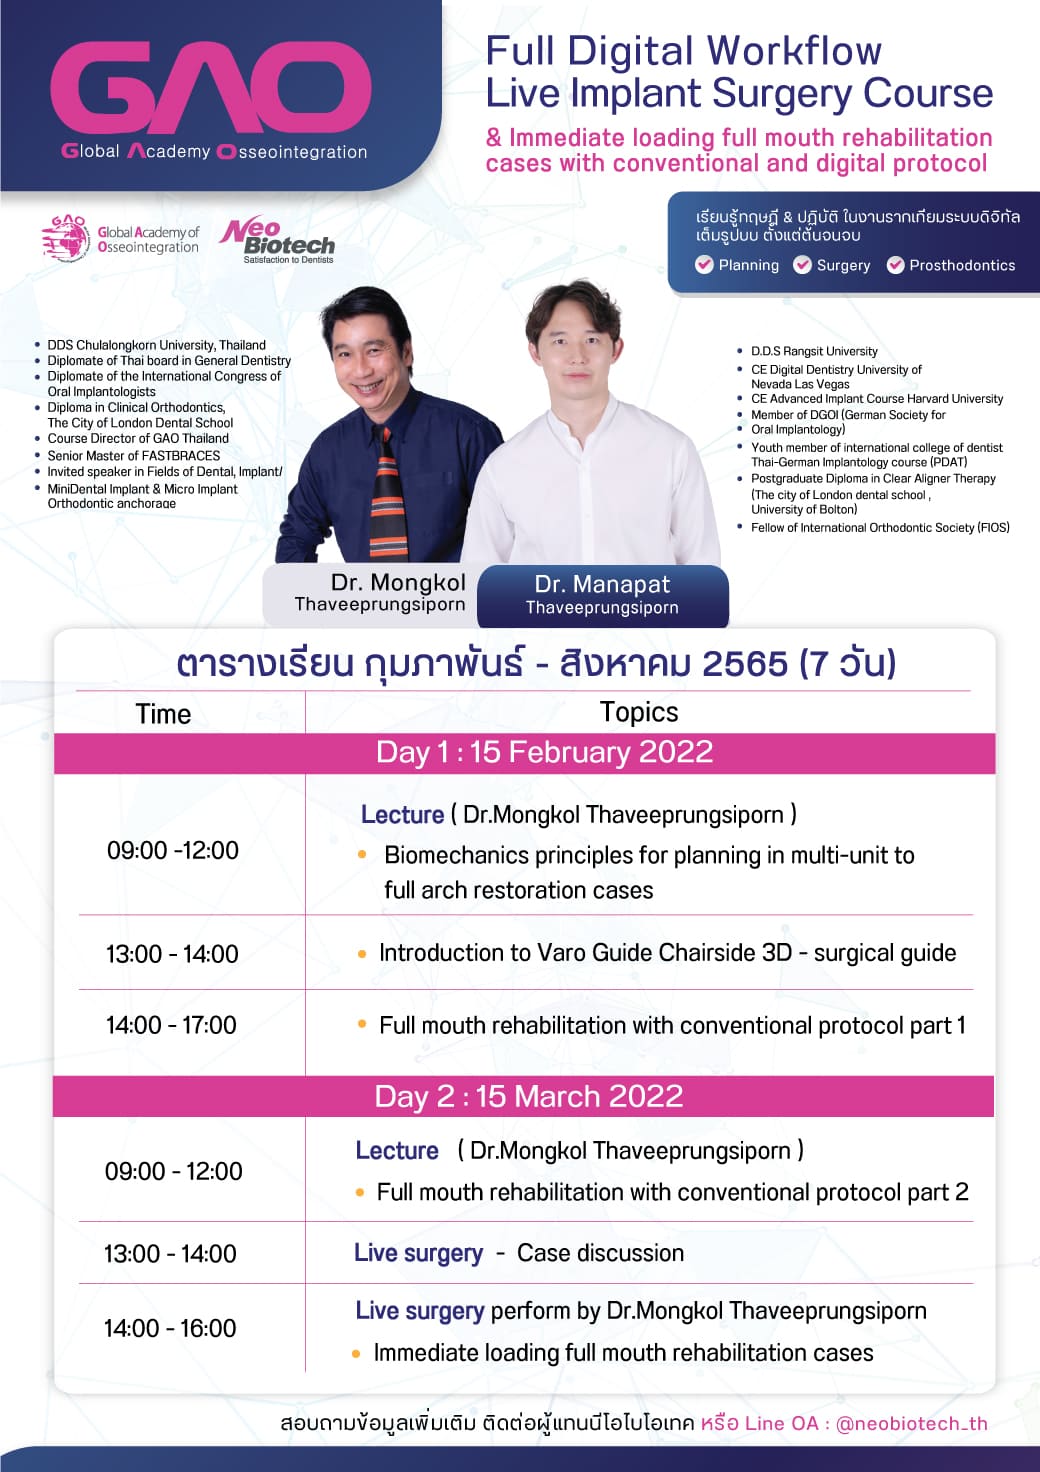 NeoBiotech Full Digital Workflow Live Implant Surgery Course